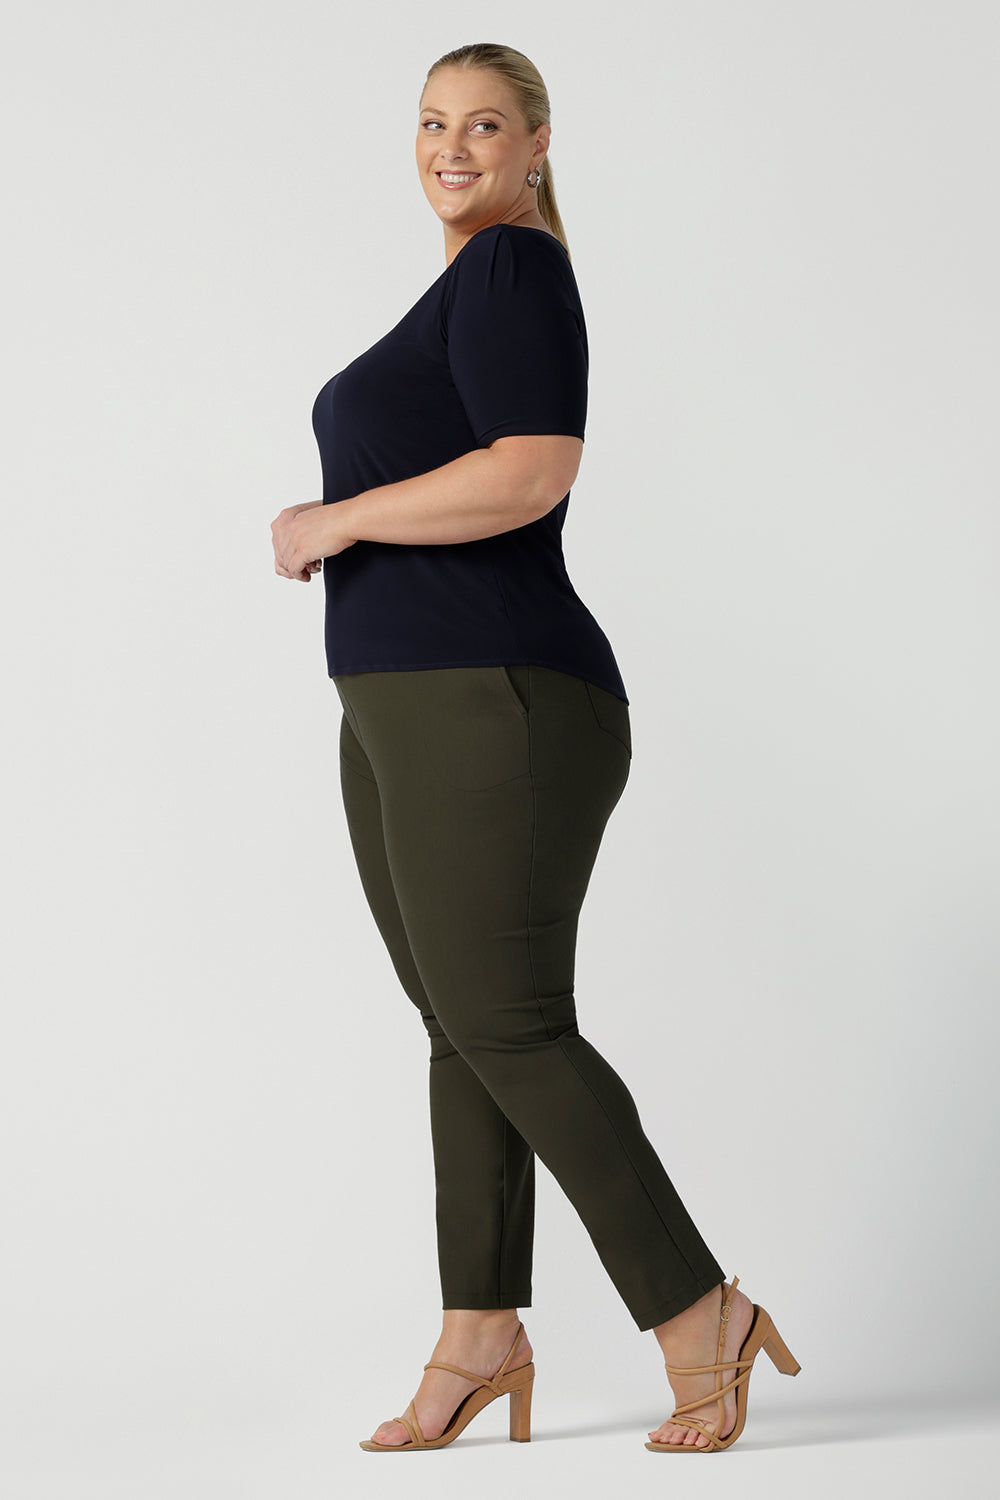 A good top for plus size, curvy women, this short sleeve, boat neck top in navy blue is worn with slim leg, olive green pants by a size 18 woman. A quality top for workwear, this slim fit jersey top is made in Australia by women's clothing brand, Leina & Fleur.